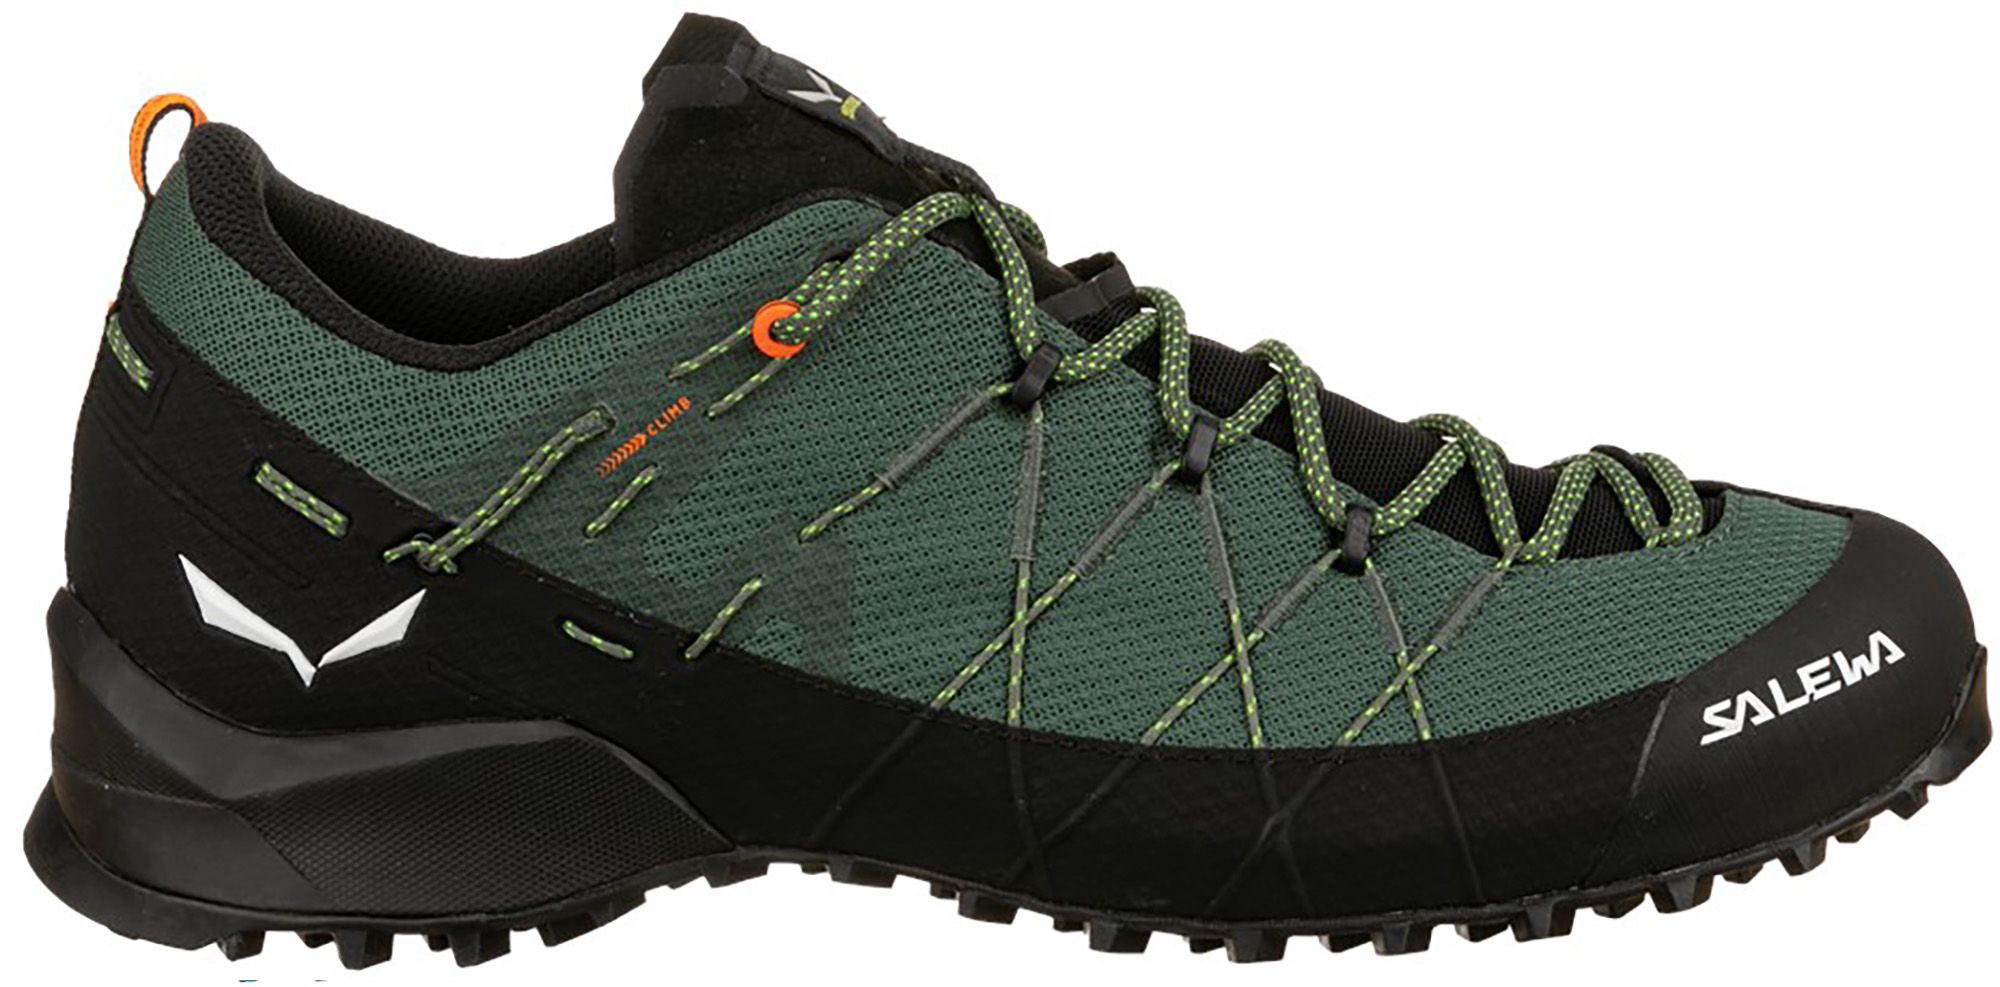 Photos - Trekking Shoes Salewa Men's Wildfire 2 Approach Shoes, Size 12, Black/Green 22IYPMMWLDFR2 